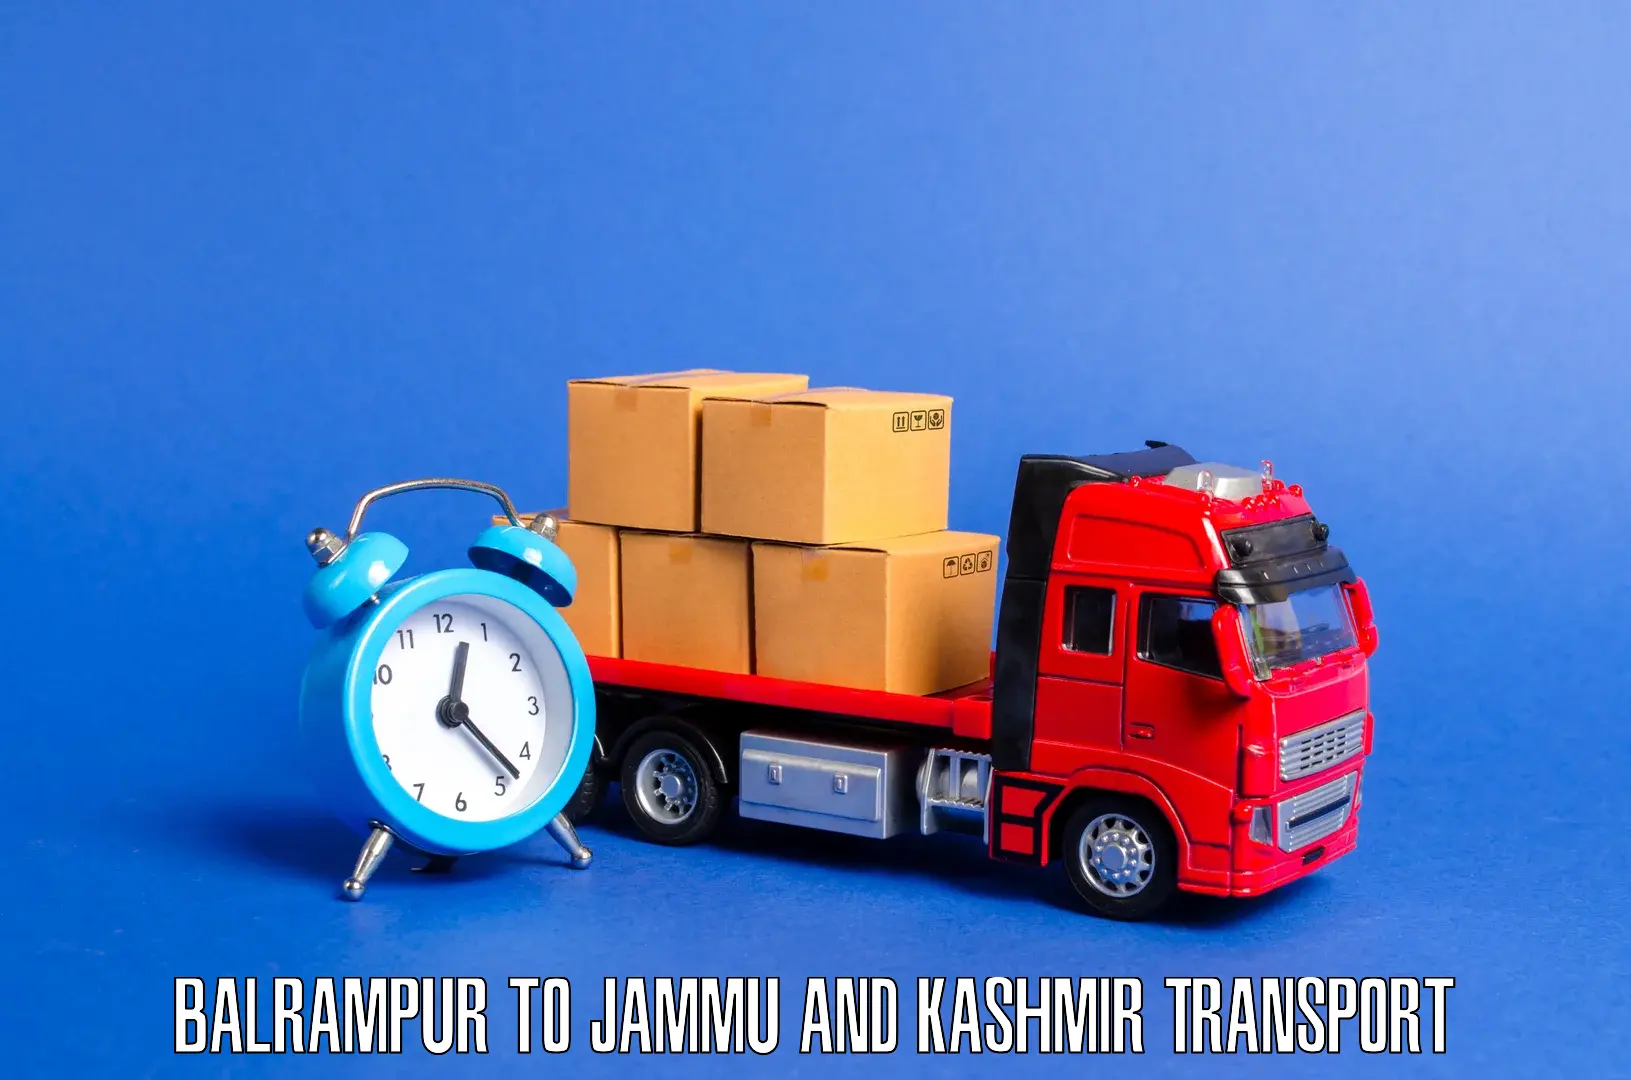 Pick up transport service Balrampur to Pulwama